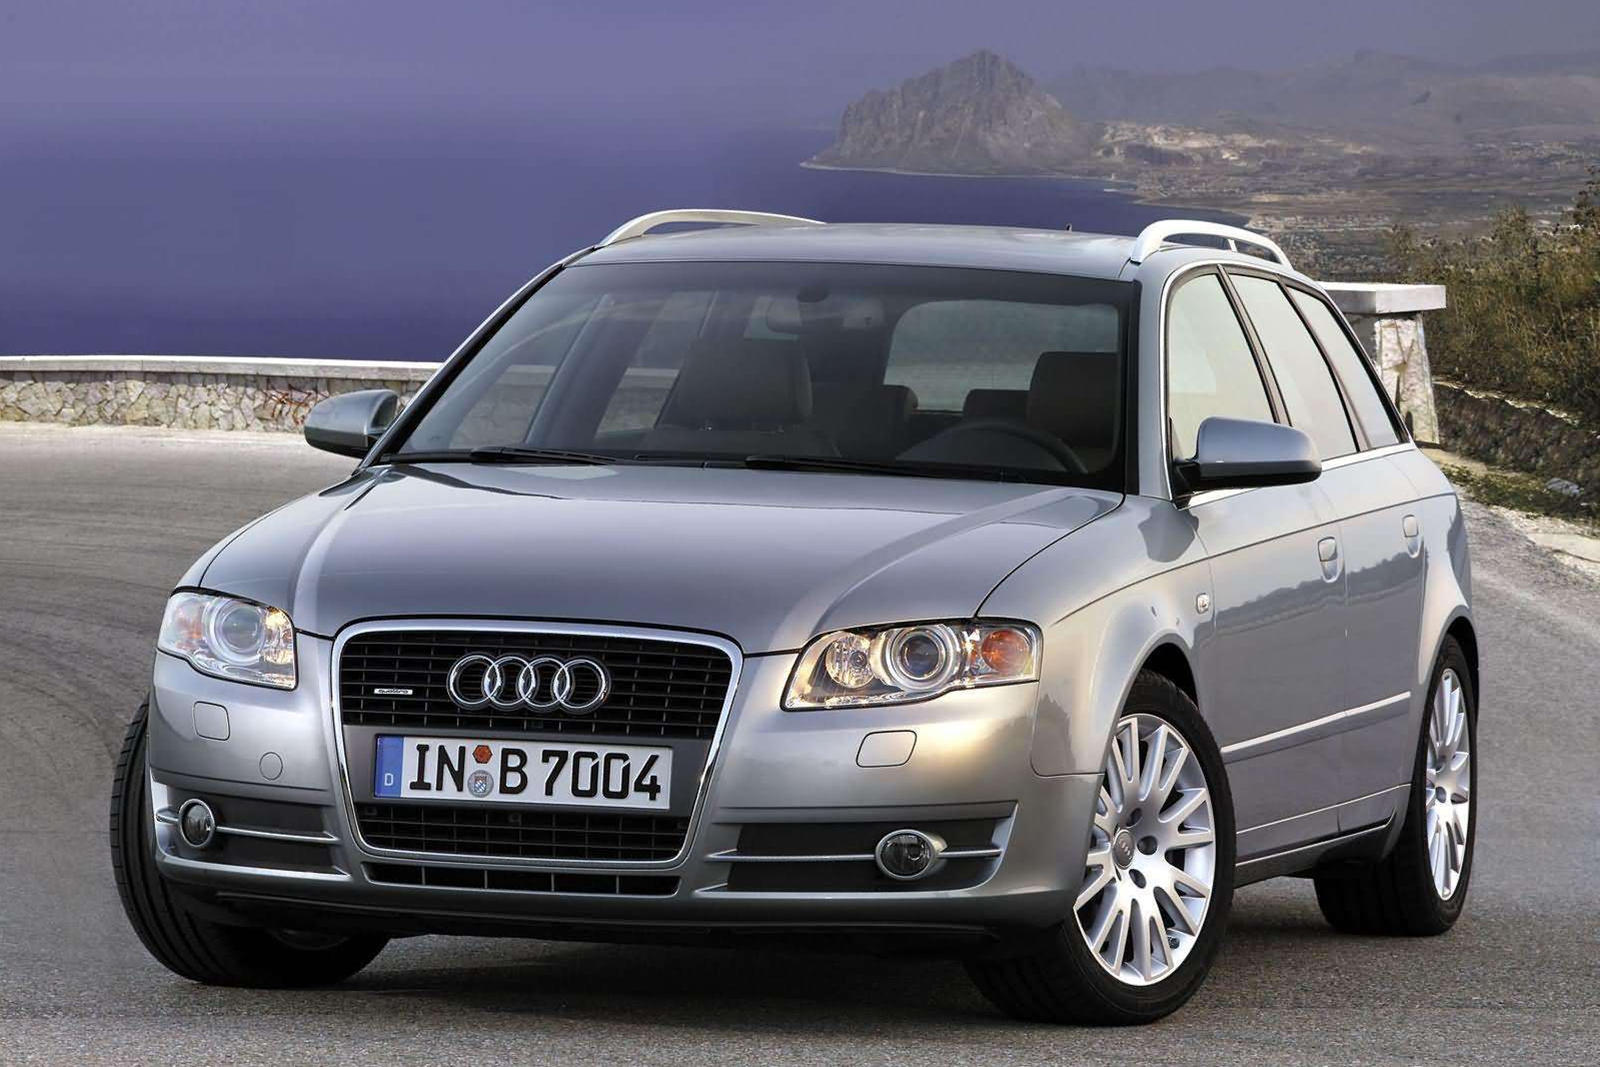 The Audi A4: History, Generations, Specifications